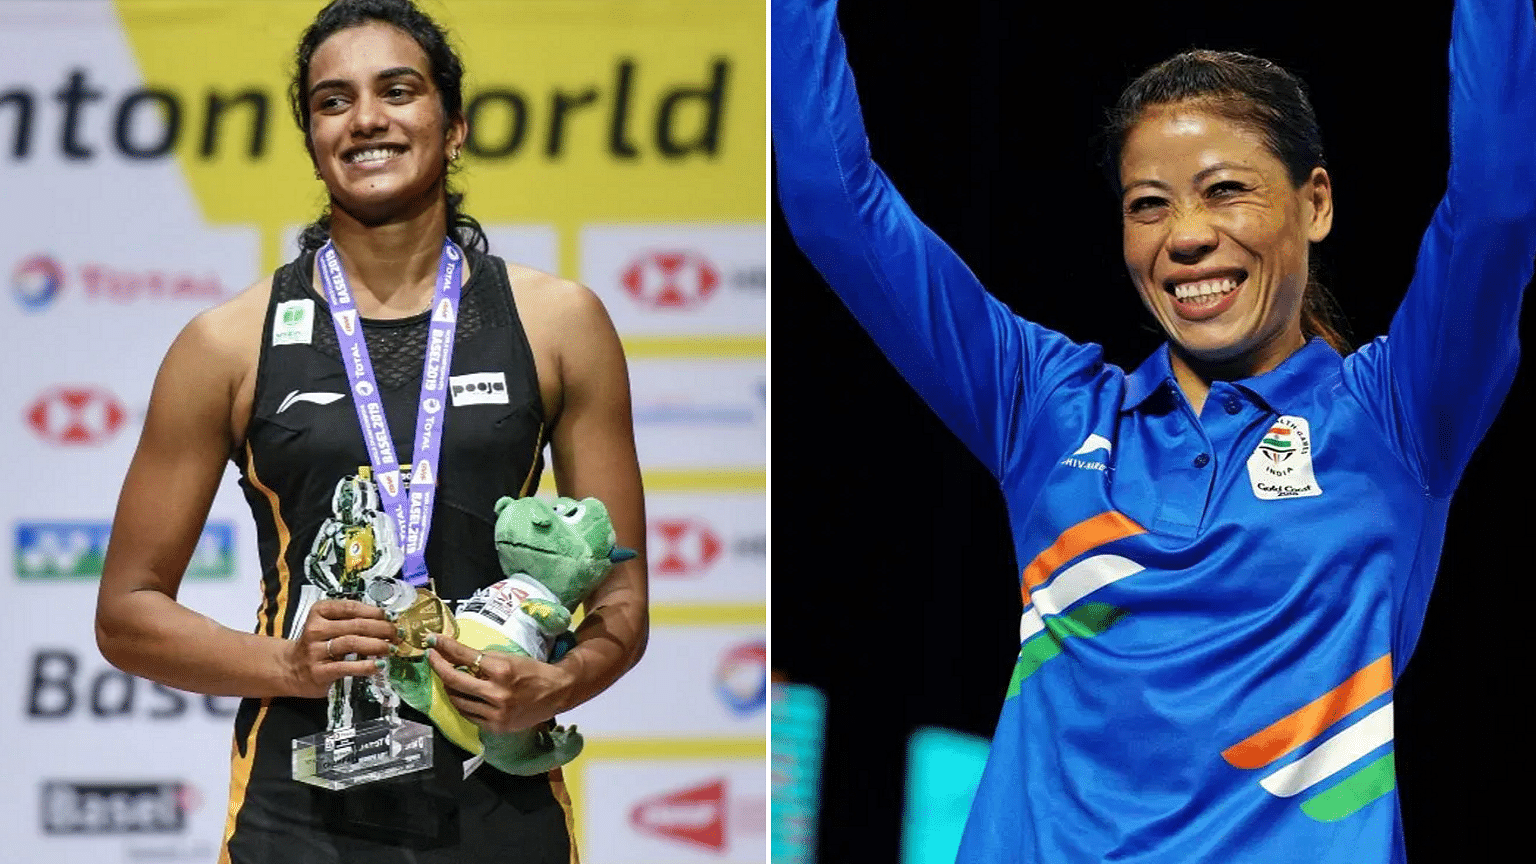 Mary Kom’s (left) was recommended for Padma Vibhushan while PV Sindhu has been recommended for the Padma Bhushan.